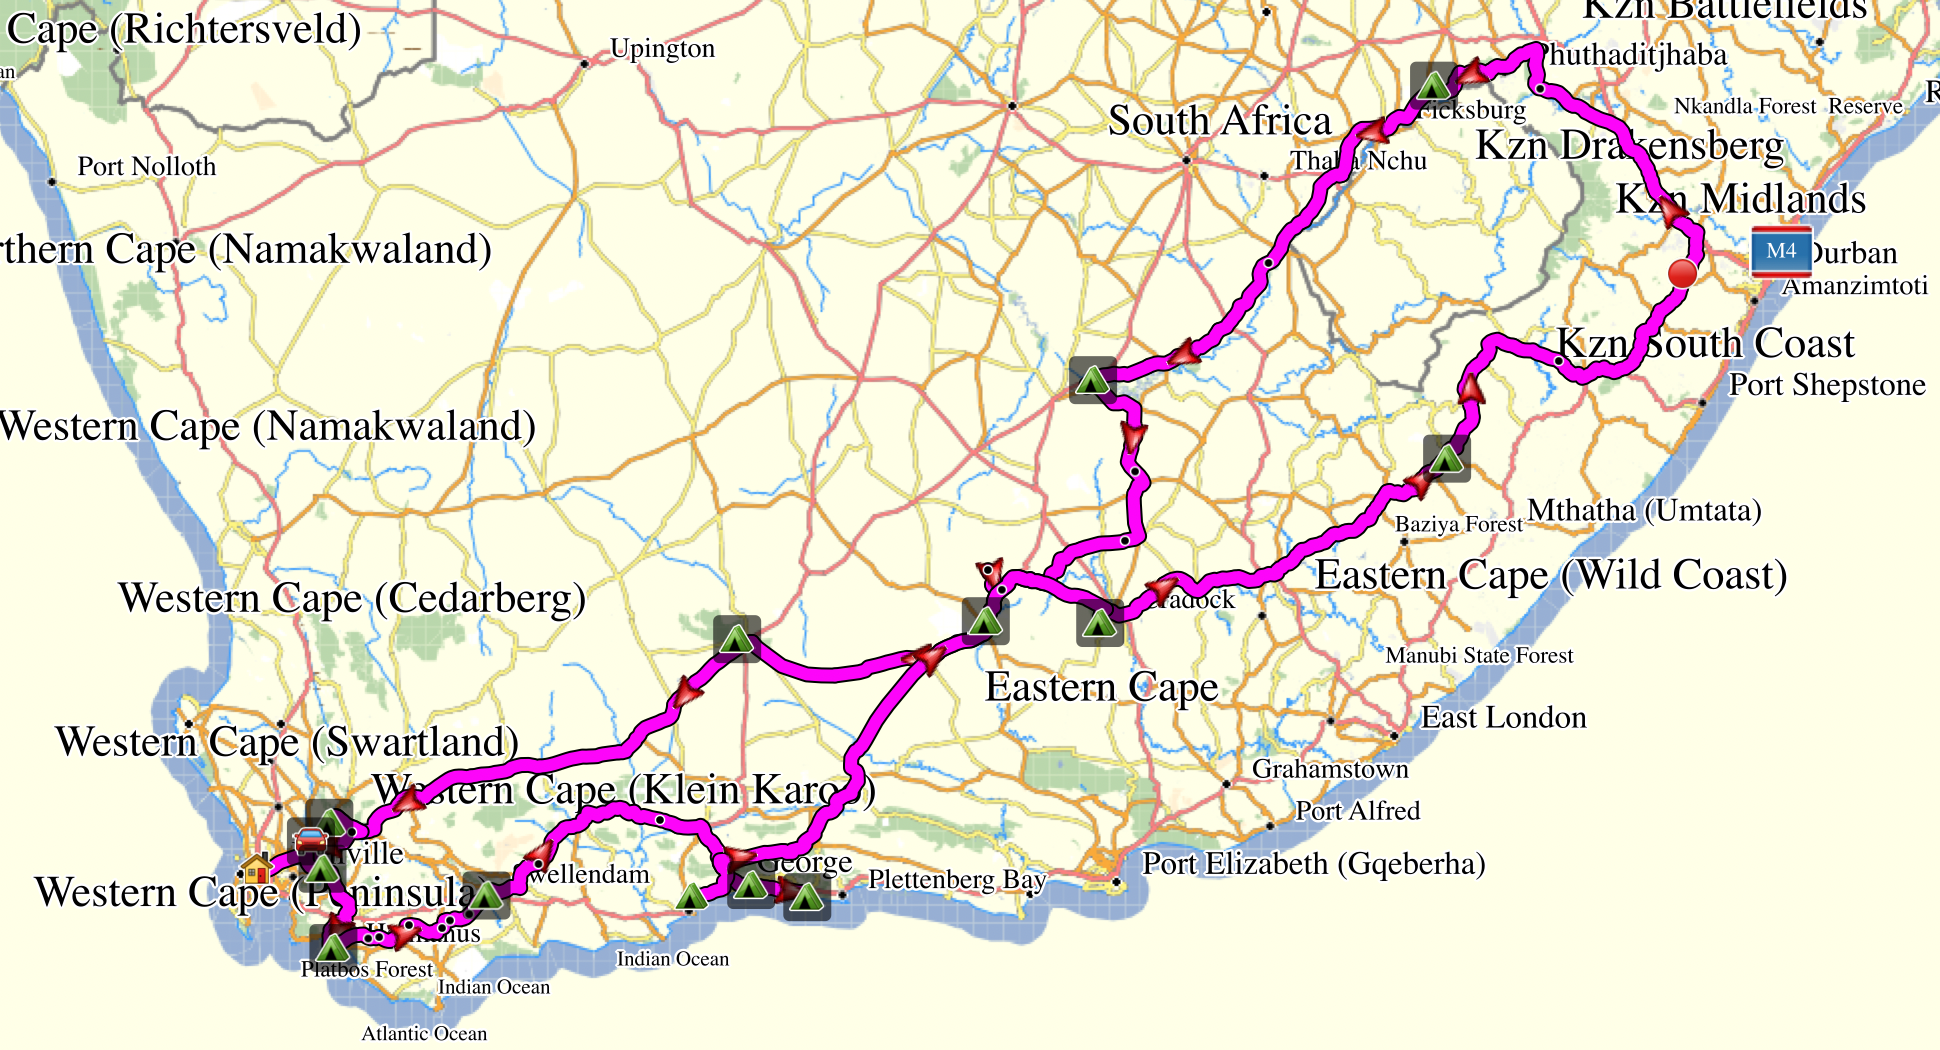 Map of our route.